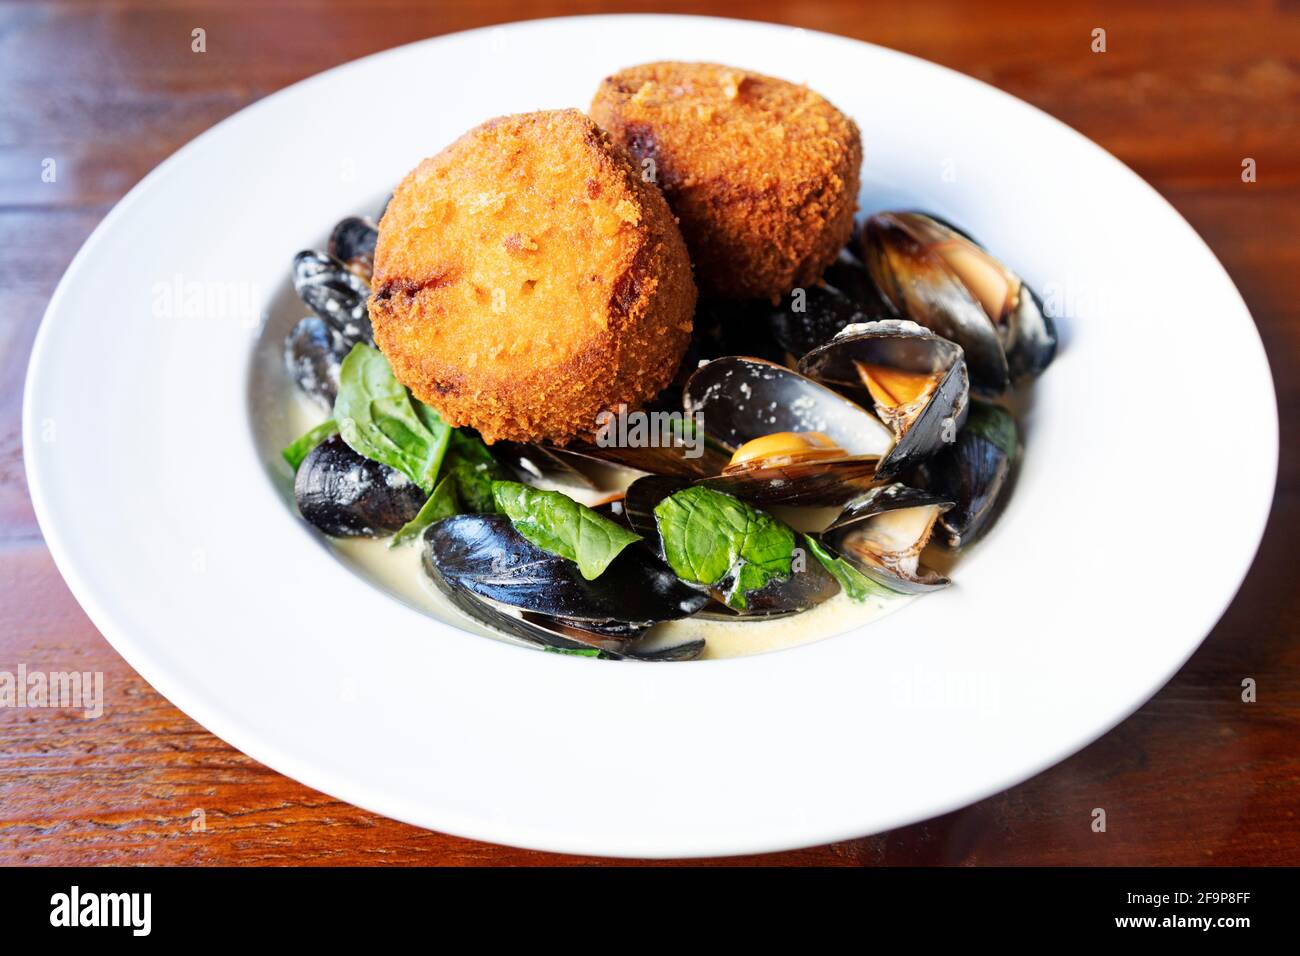 A plate of steamed mussels topped with handmade fishcakes.. The breadcrumbs on the fishcakes are golden in colour. Stock Photo